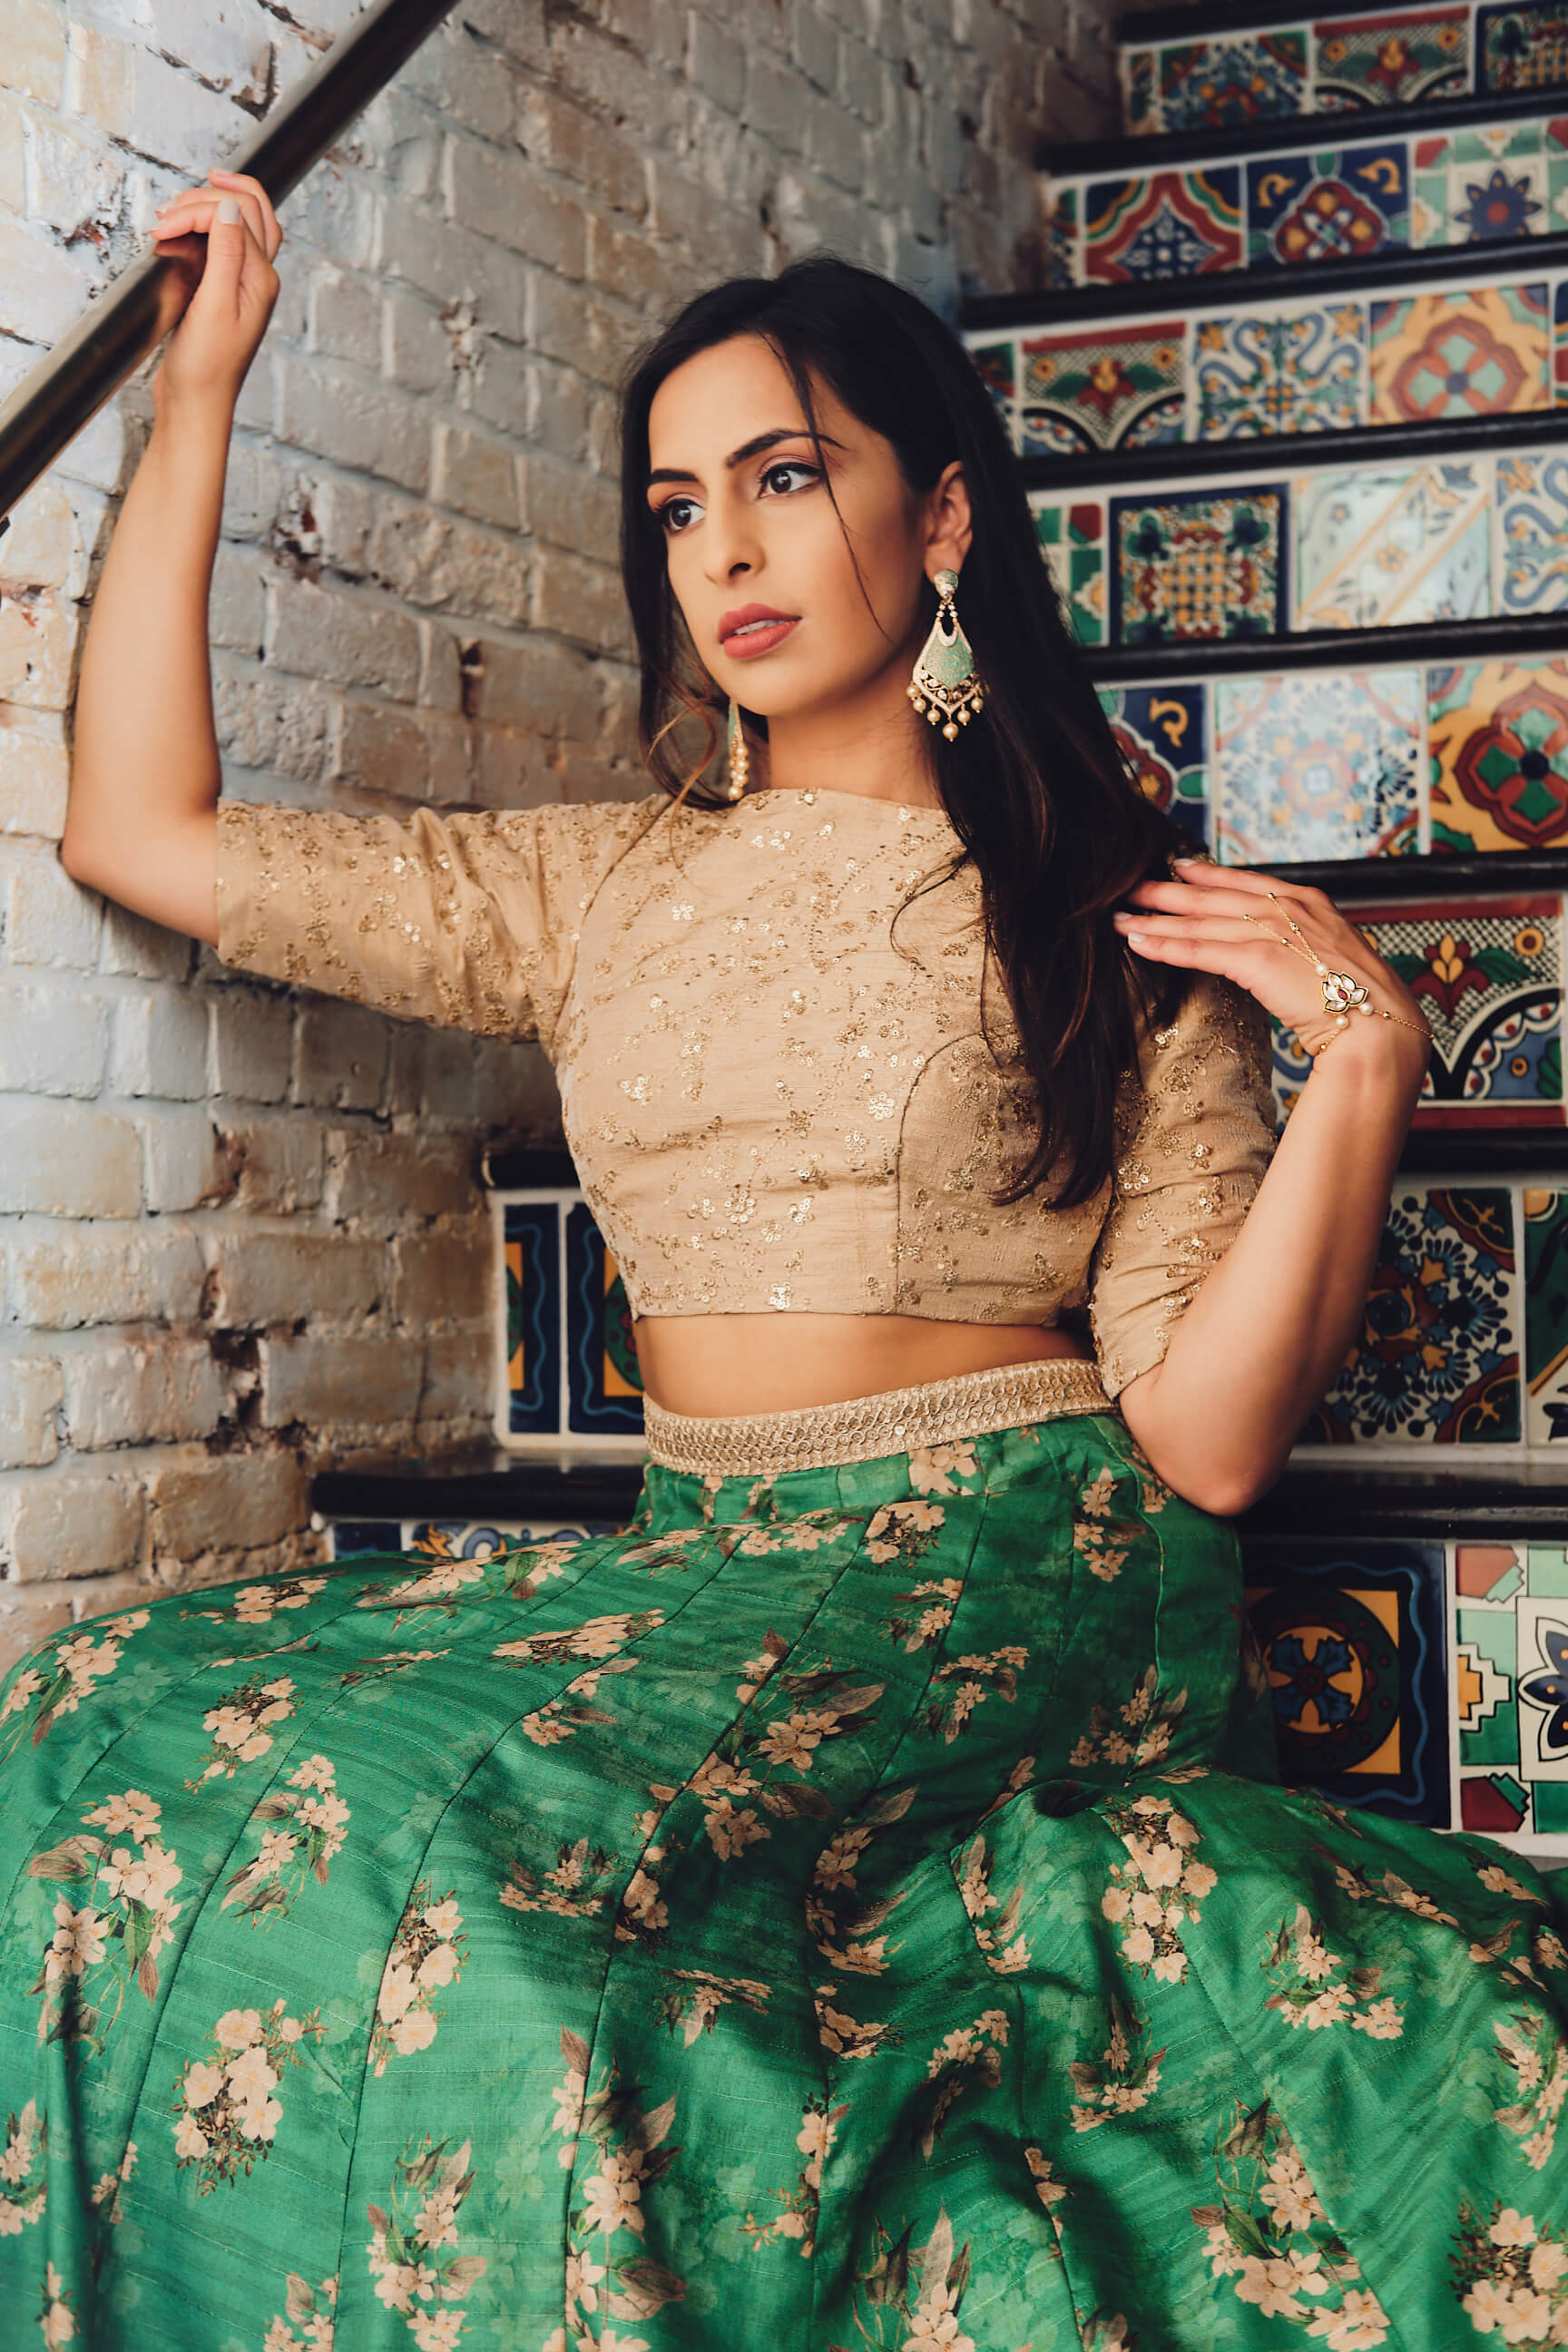 Niraly - Wildflower Clothing Brand - Indian Clothing Brand - Women's Fashion Photography - Clothing Product Photography - Lifestyle Photography - Zona Libre - New Jersey